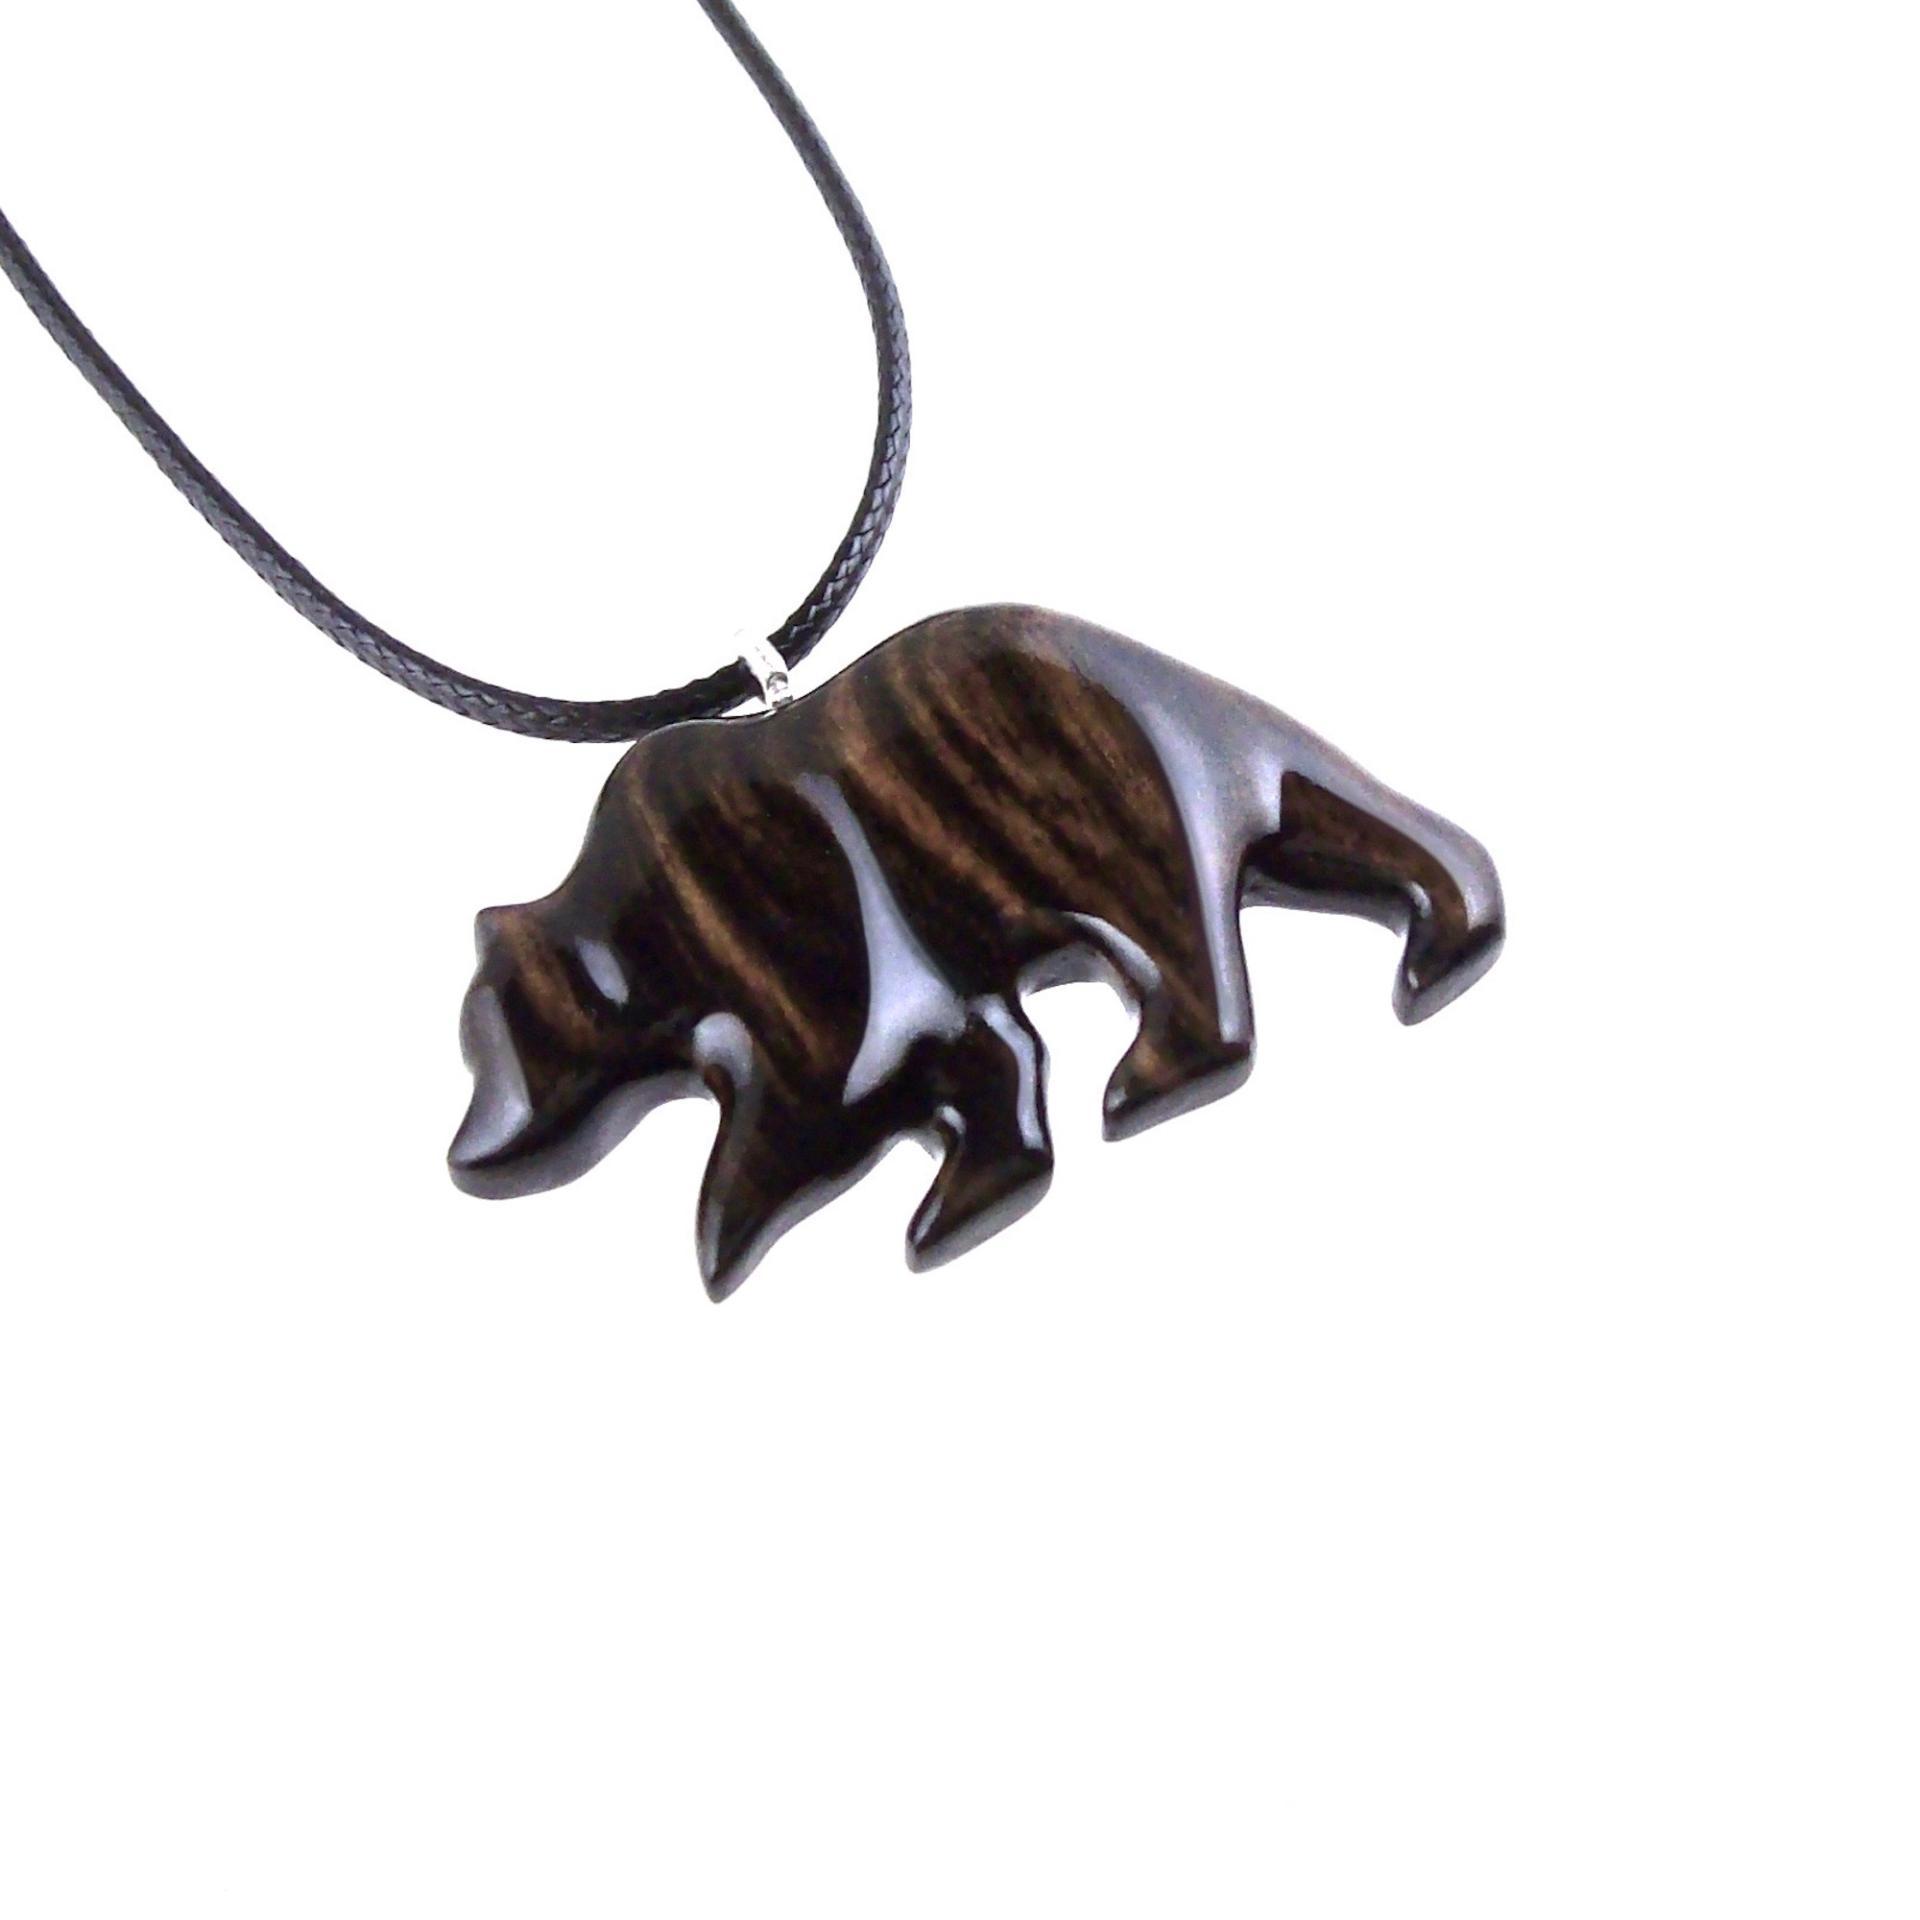 Wooden Grizzly Bear Pendant, Bear Necklace for Men or Women, Hand Carved Wood Jewelry, Totem Spirit Animal in Black with Brown Streaks